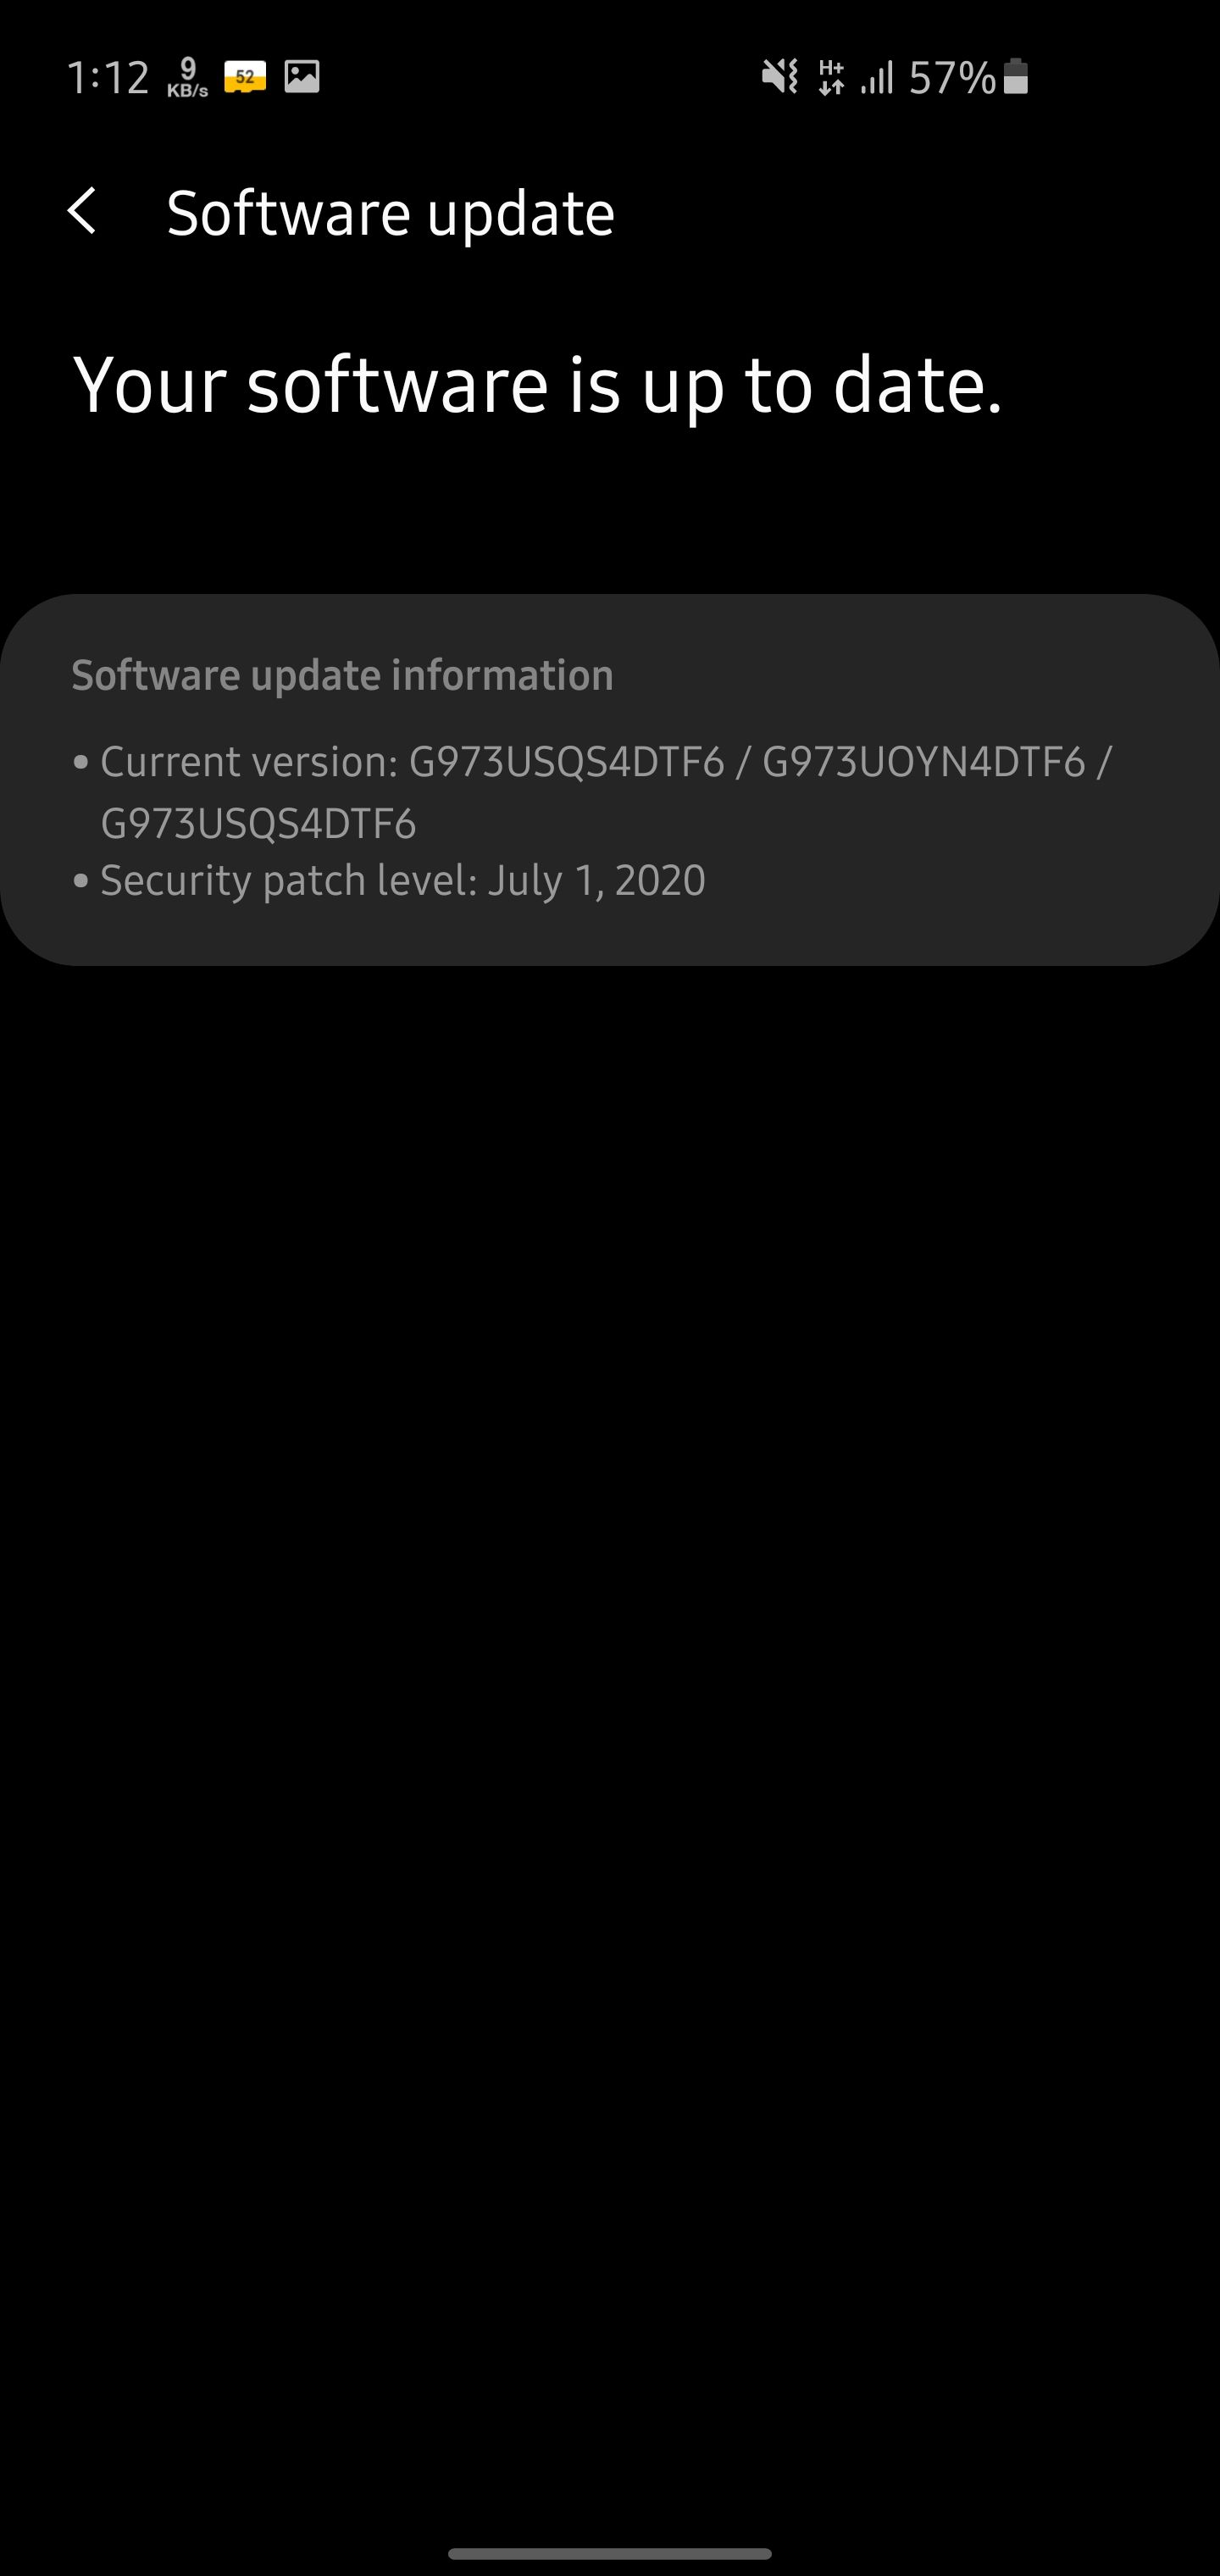 S10e firmware update via Odin3 is stuck at recovery.img - Samsung  Community